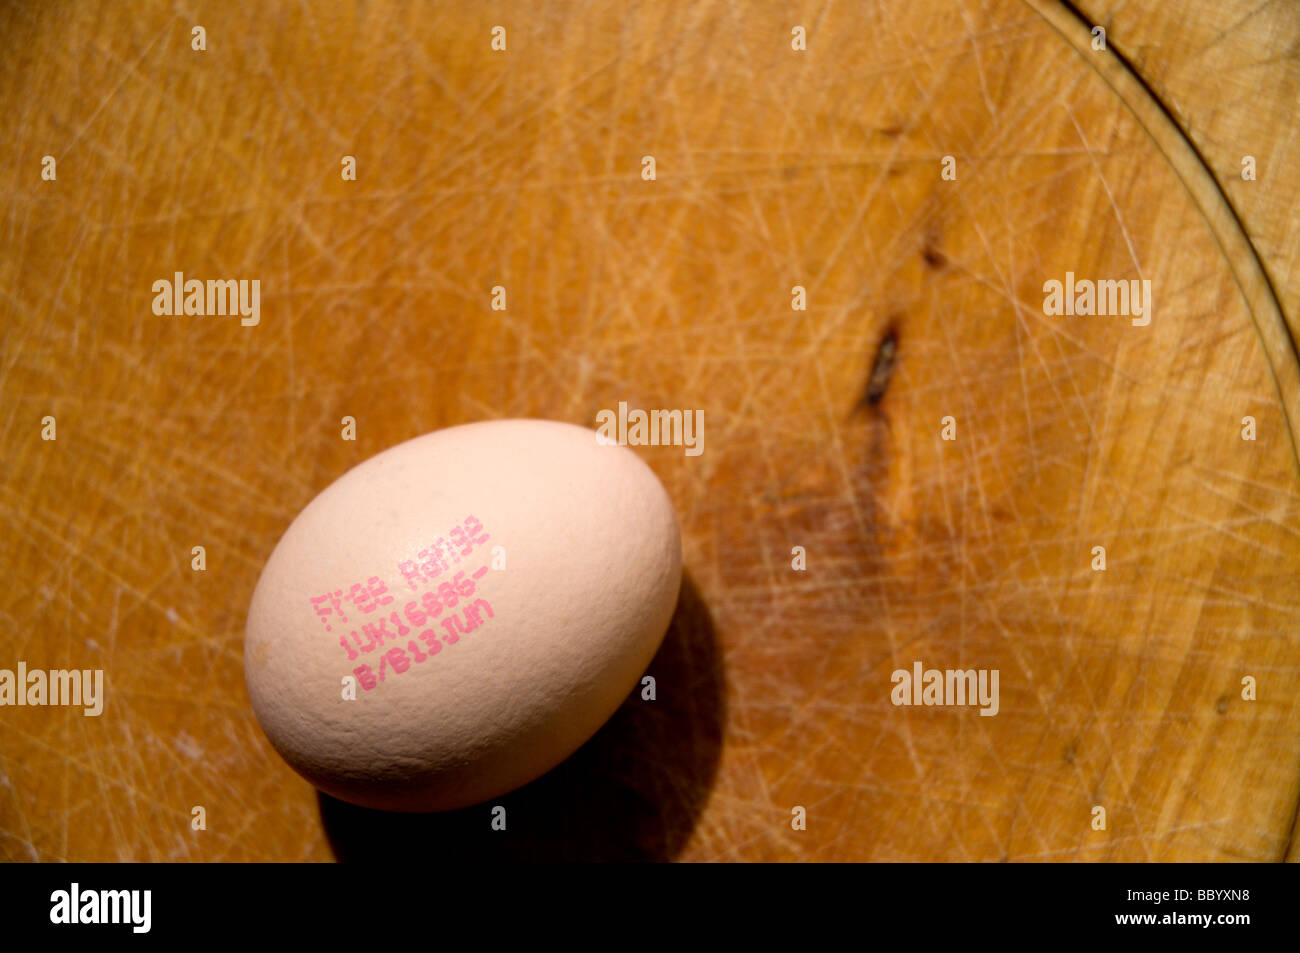 A free range egg on a wooden chopping board. Use by date can be seen on the egg. Stock Photo